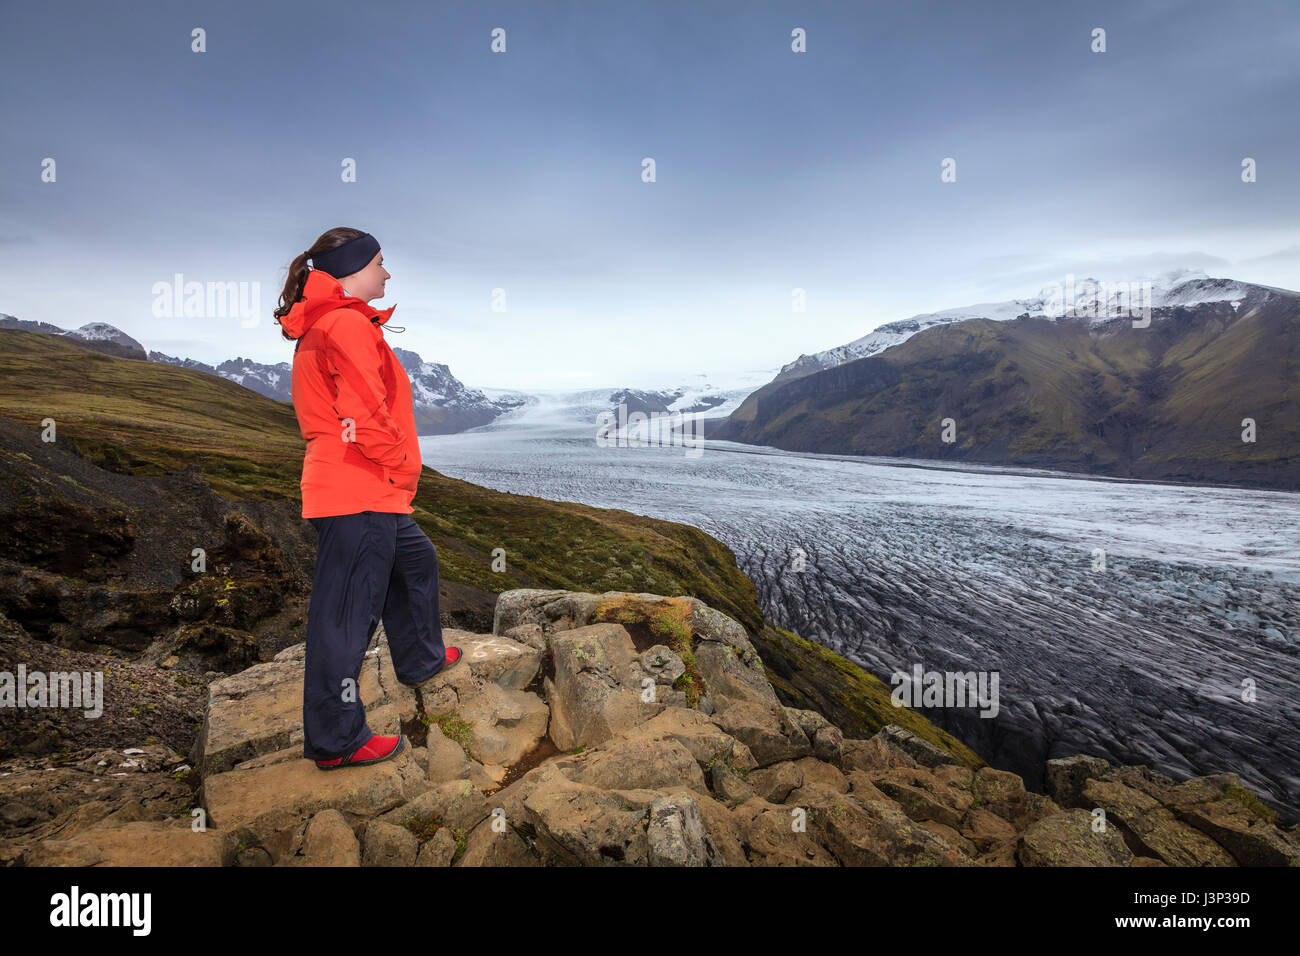 A hiker admiring view of Fjallsarlon glacier in Southern Iceland Stock Photo